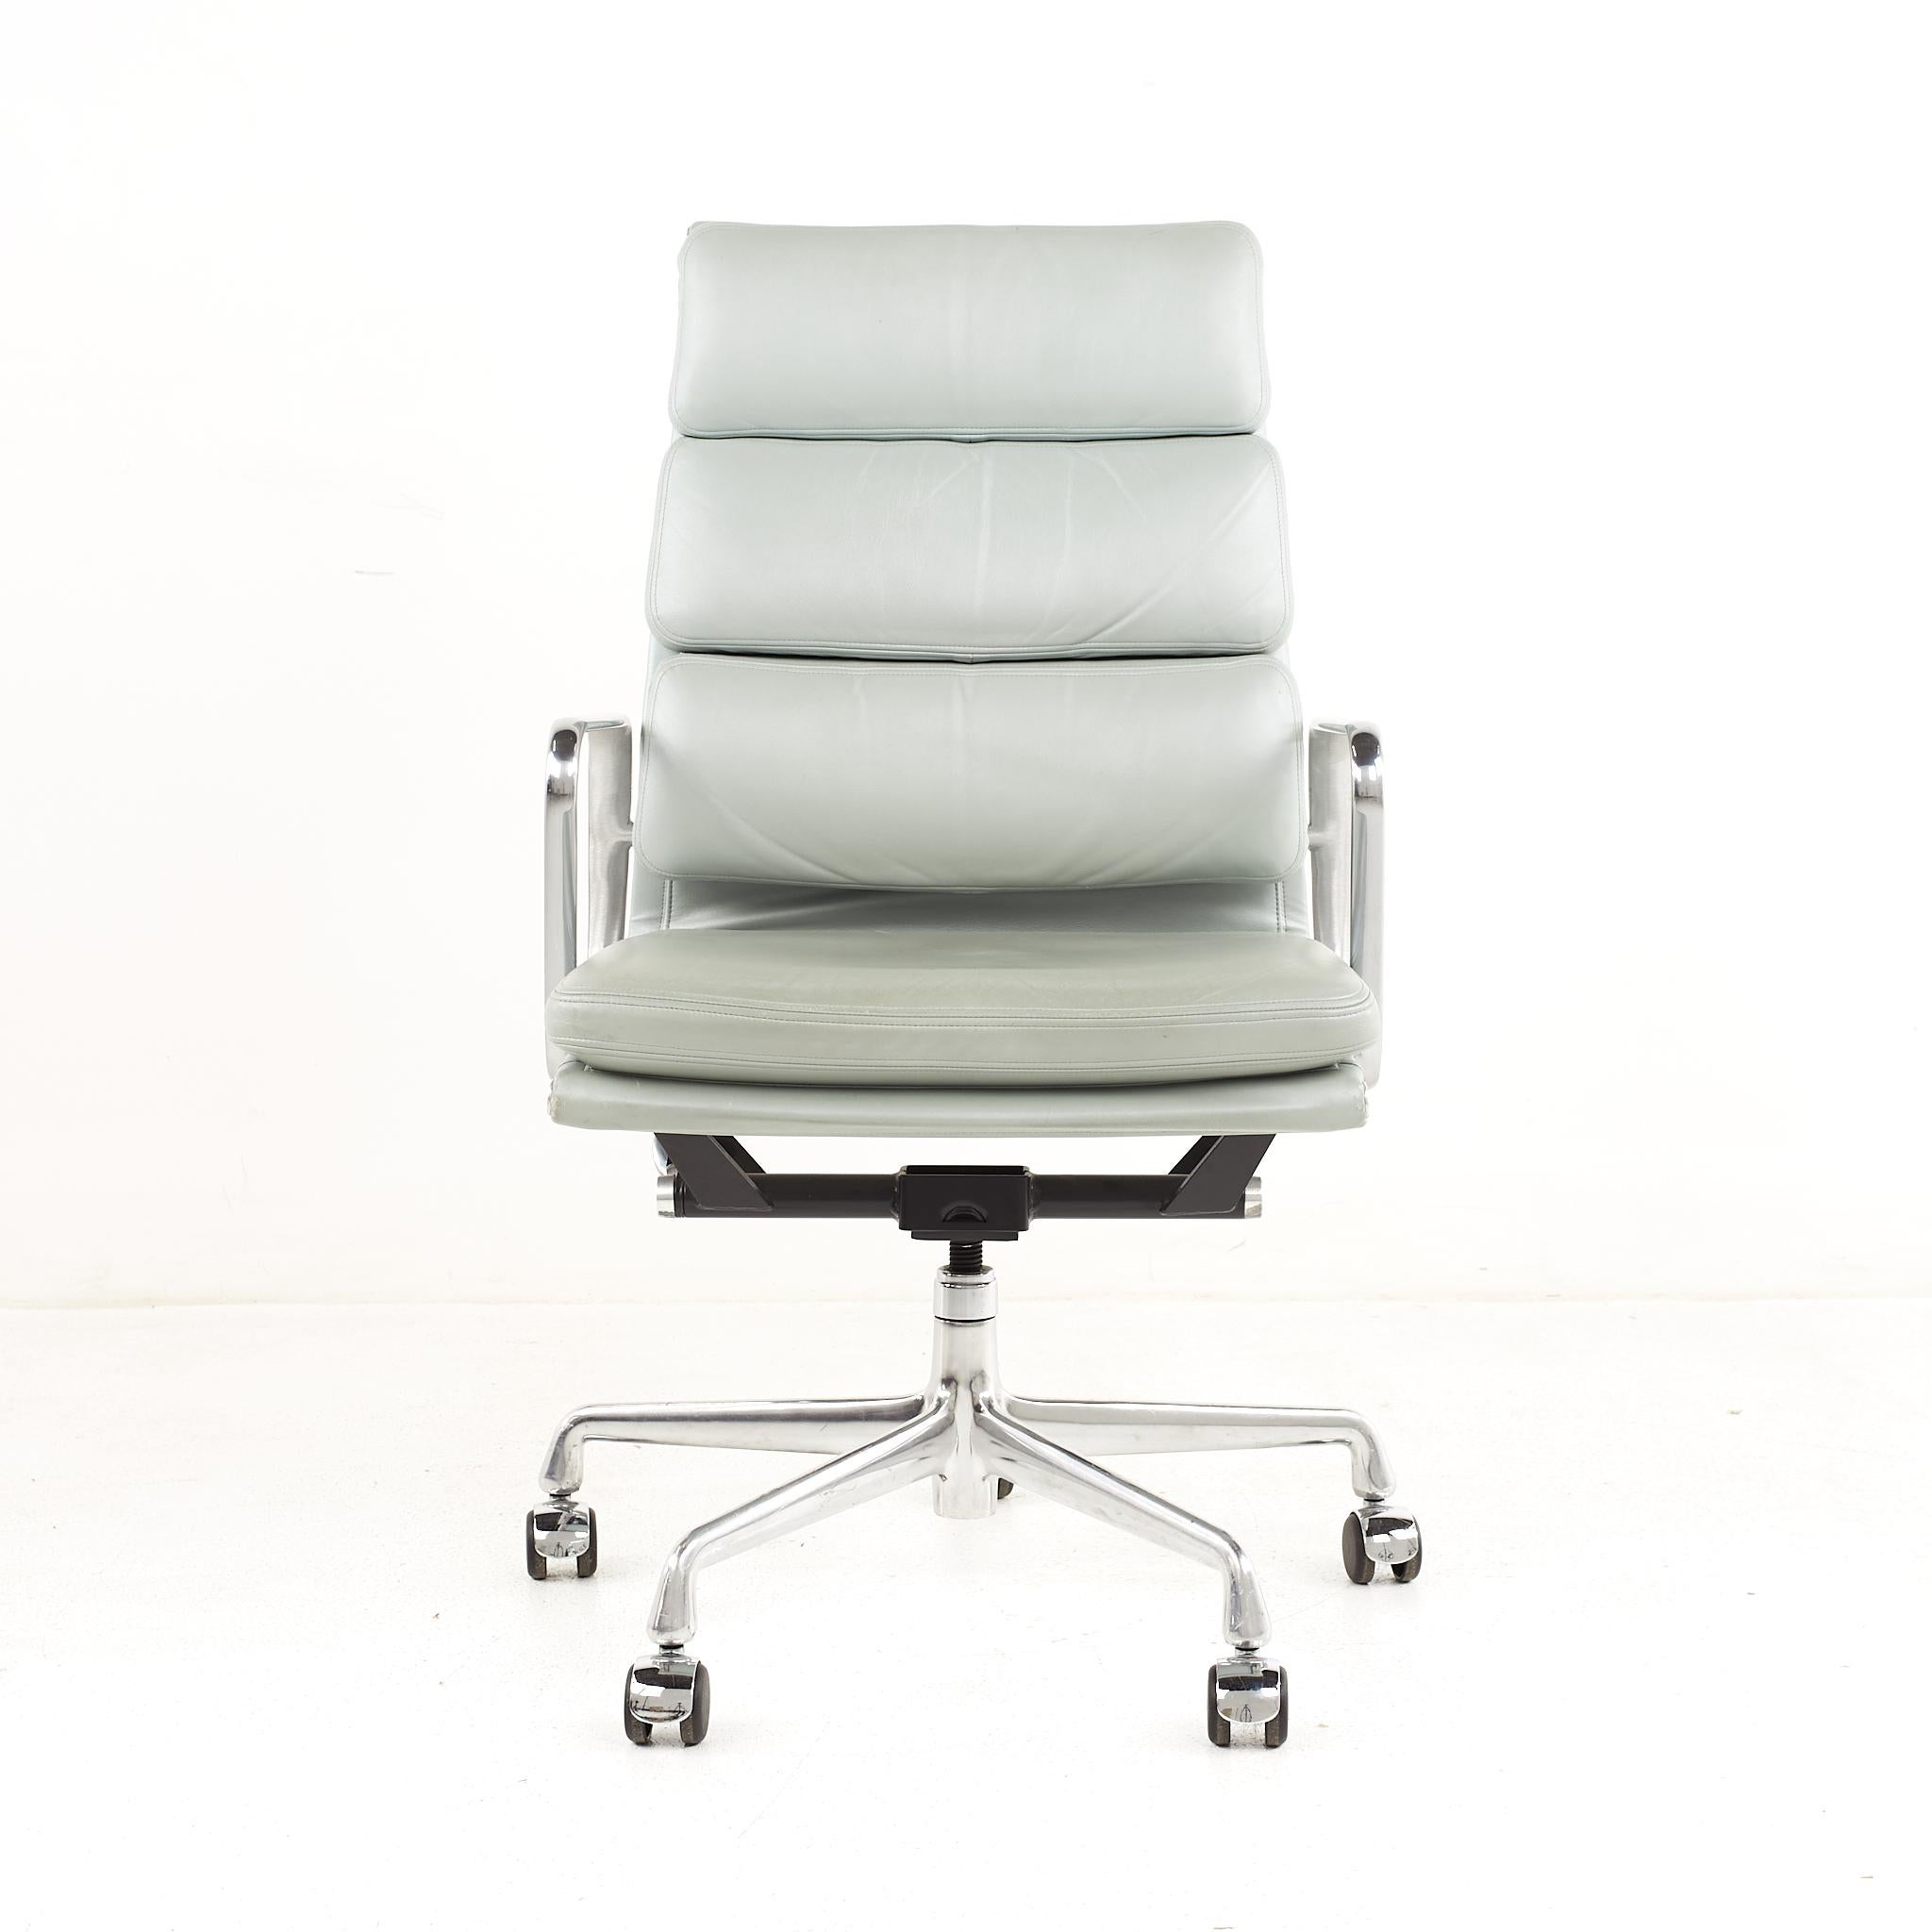 Eames mid-century soft pad chair.

The chair measures: 22 wide x 20.5 deep x 39.5 high, with a seat height of 19.5 inches and arm height of 25.25 inches

All pieces of furniture can be had in what we call restored vintage condition. That means the